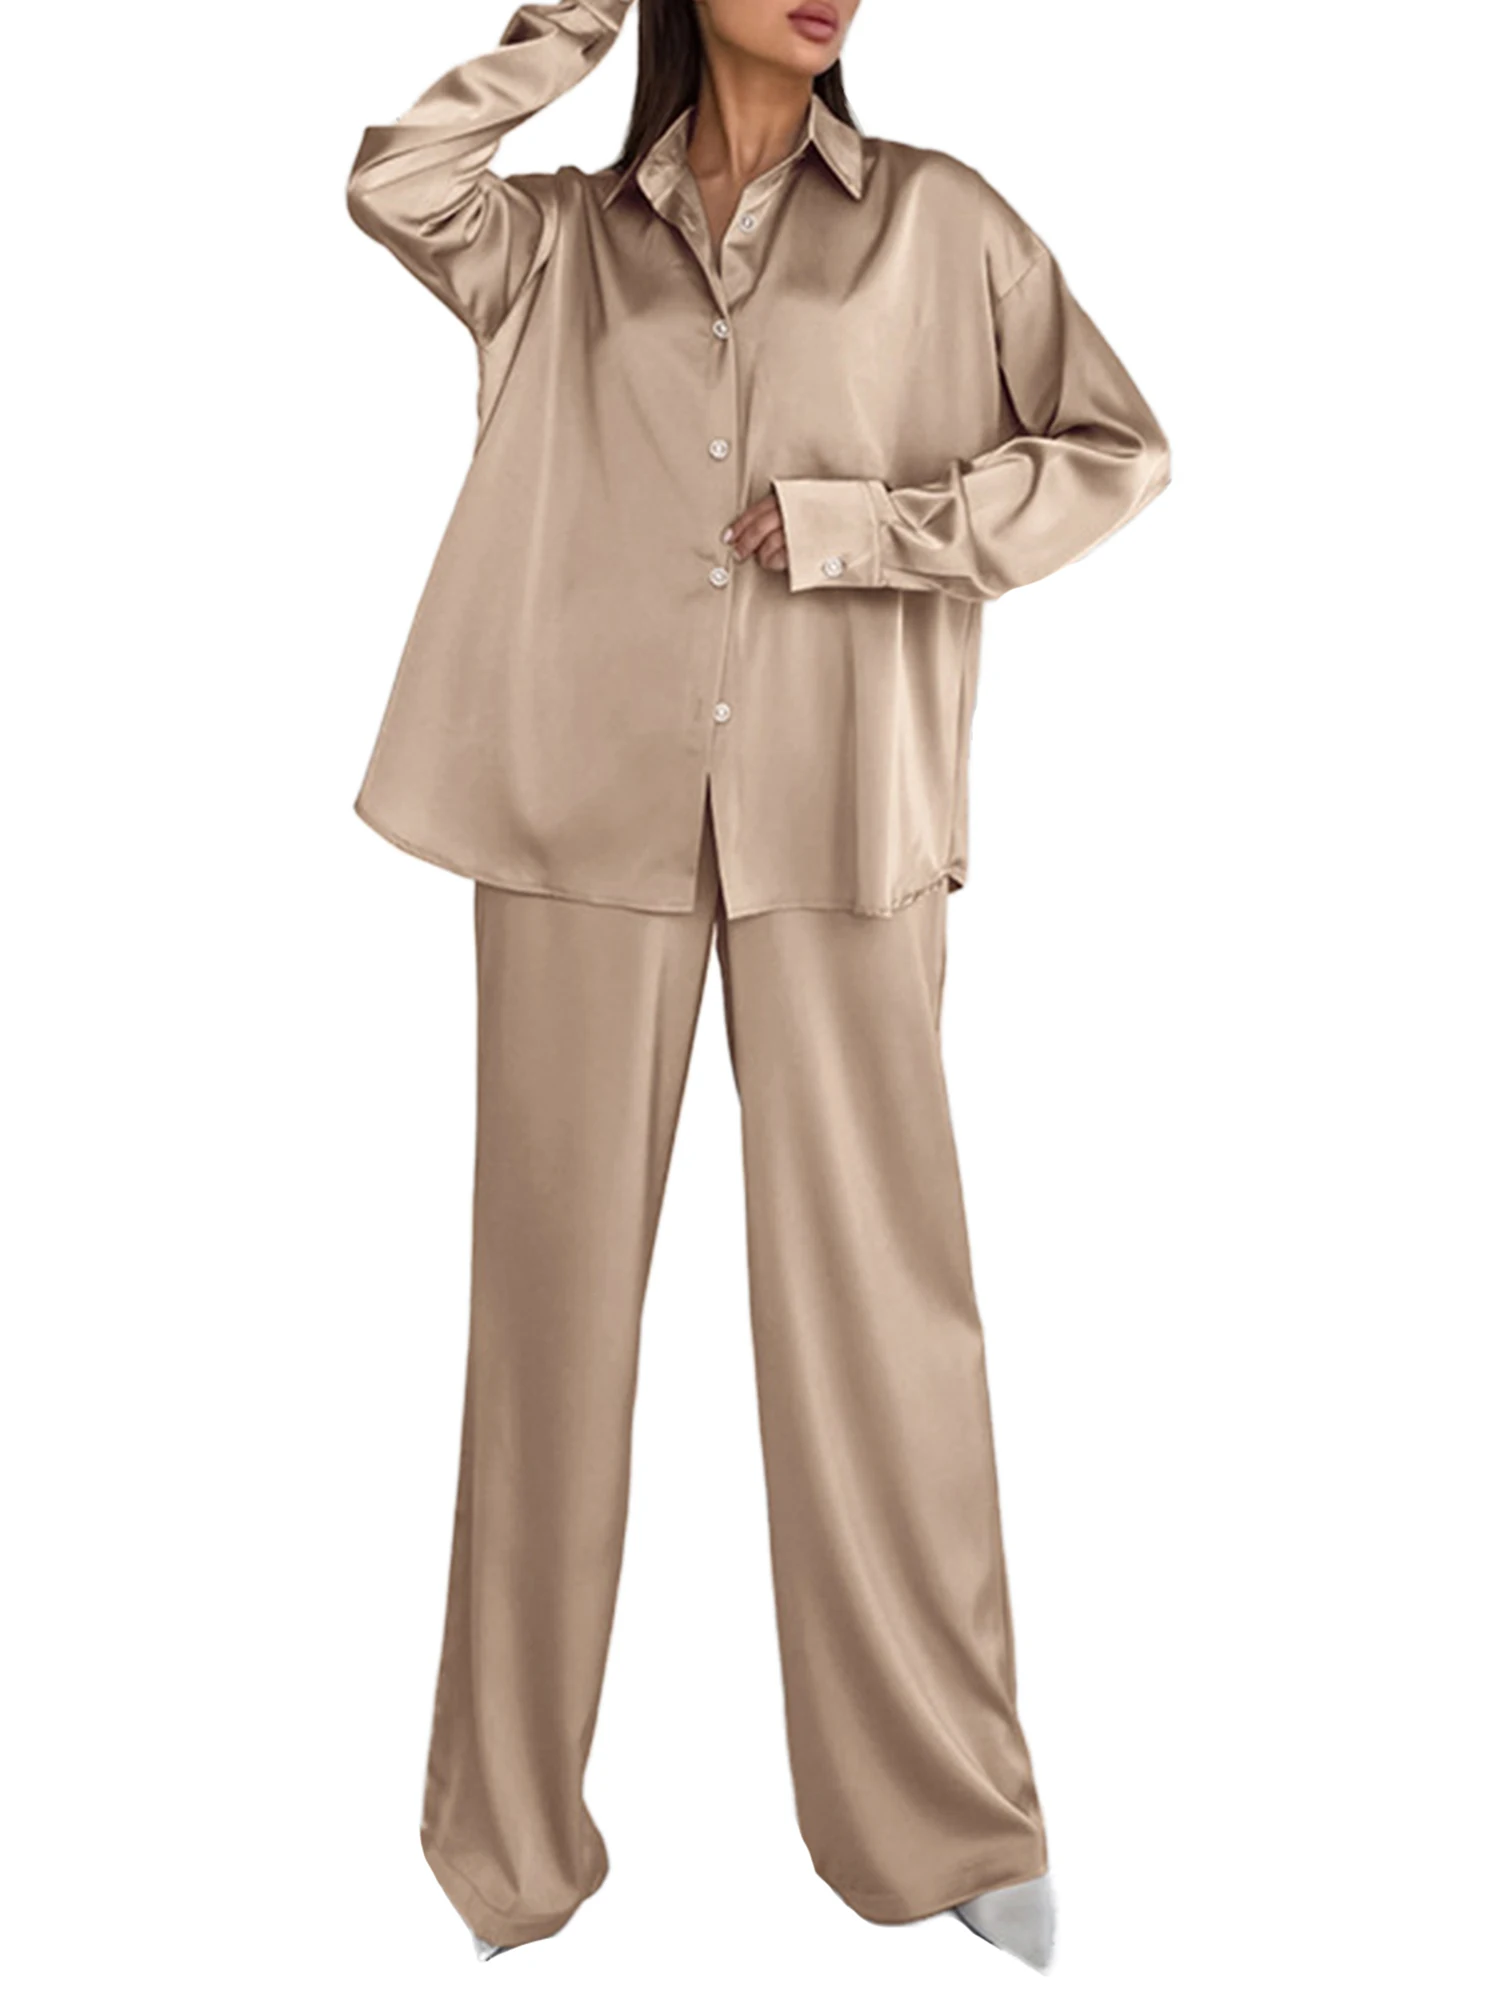 

Women s Cozy 2 Piece Pajama Sets Long Sleeve Button-Down Shirt and Pants for a Perfectly Relaxed Sleepwear Ensemble